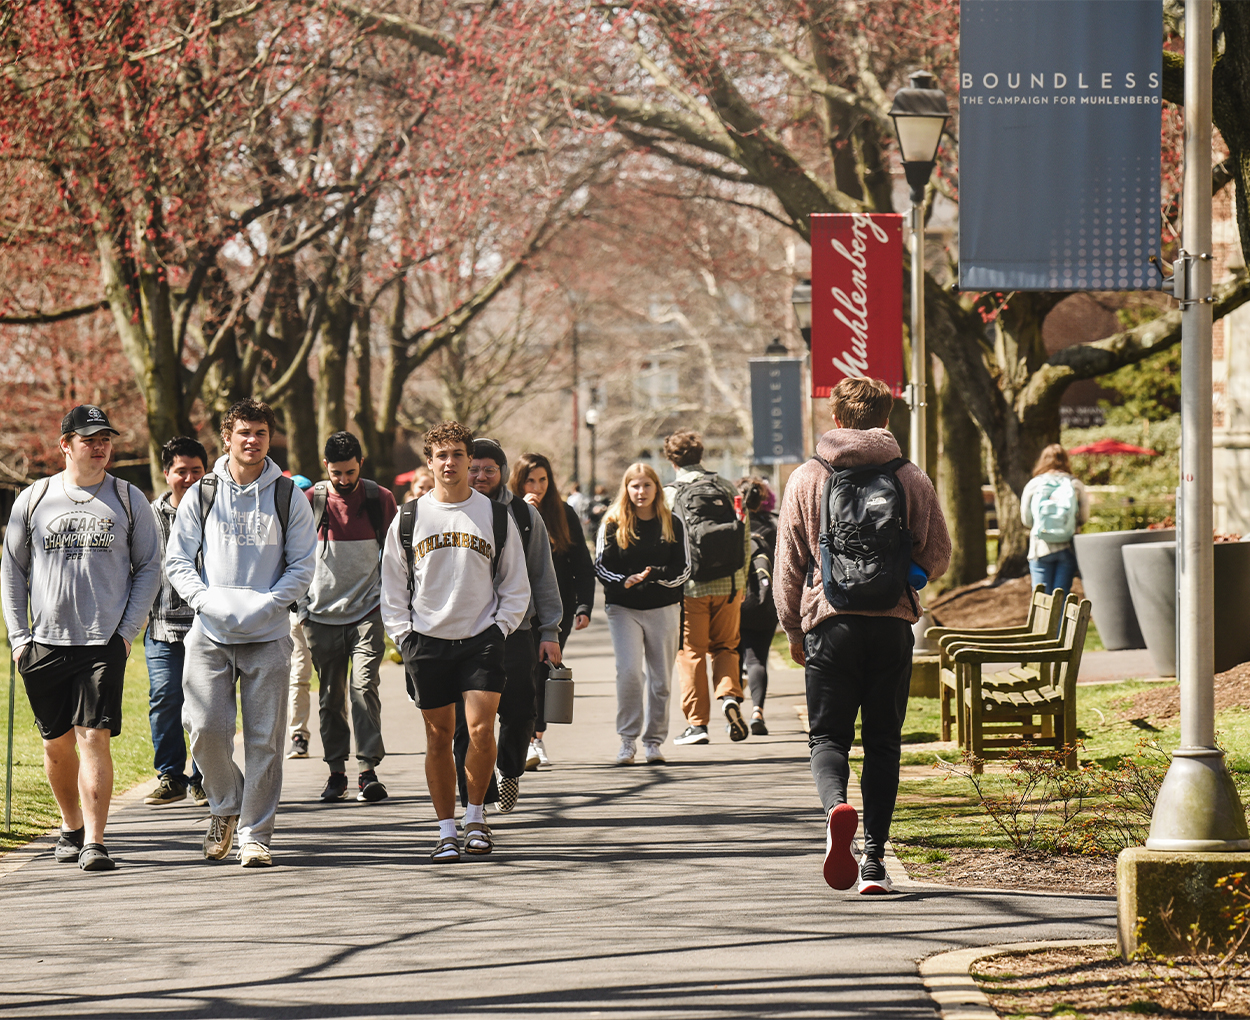 Students walk down a tree-lined sidewalk on a college campus with banners that read Muhlenberg.